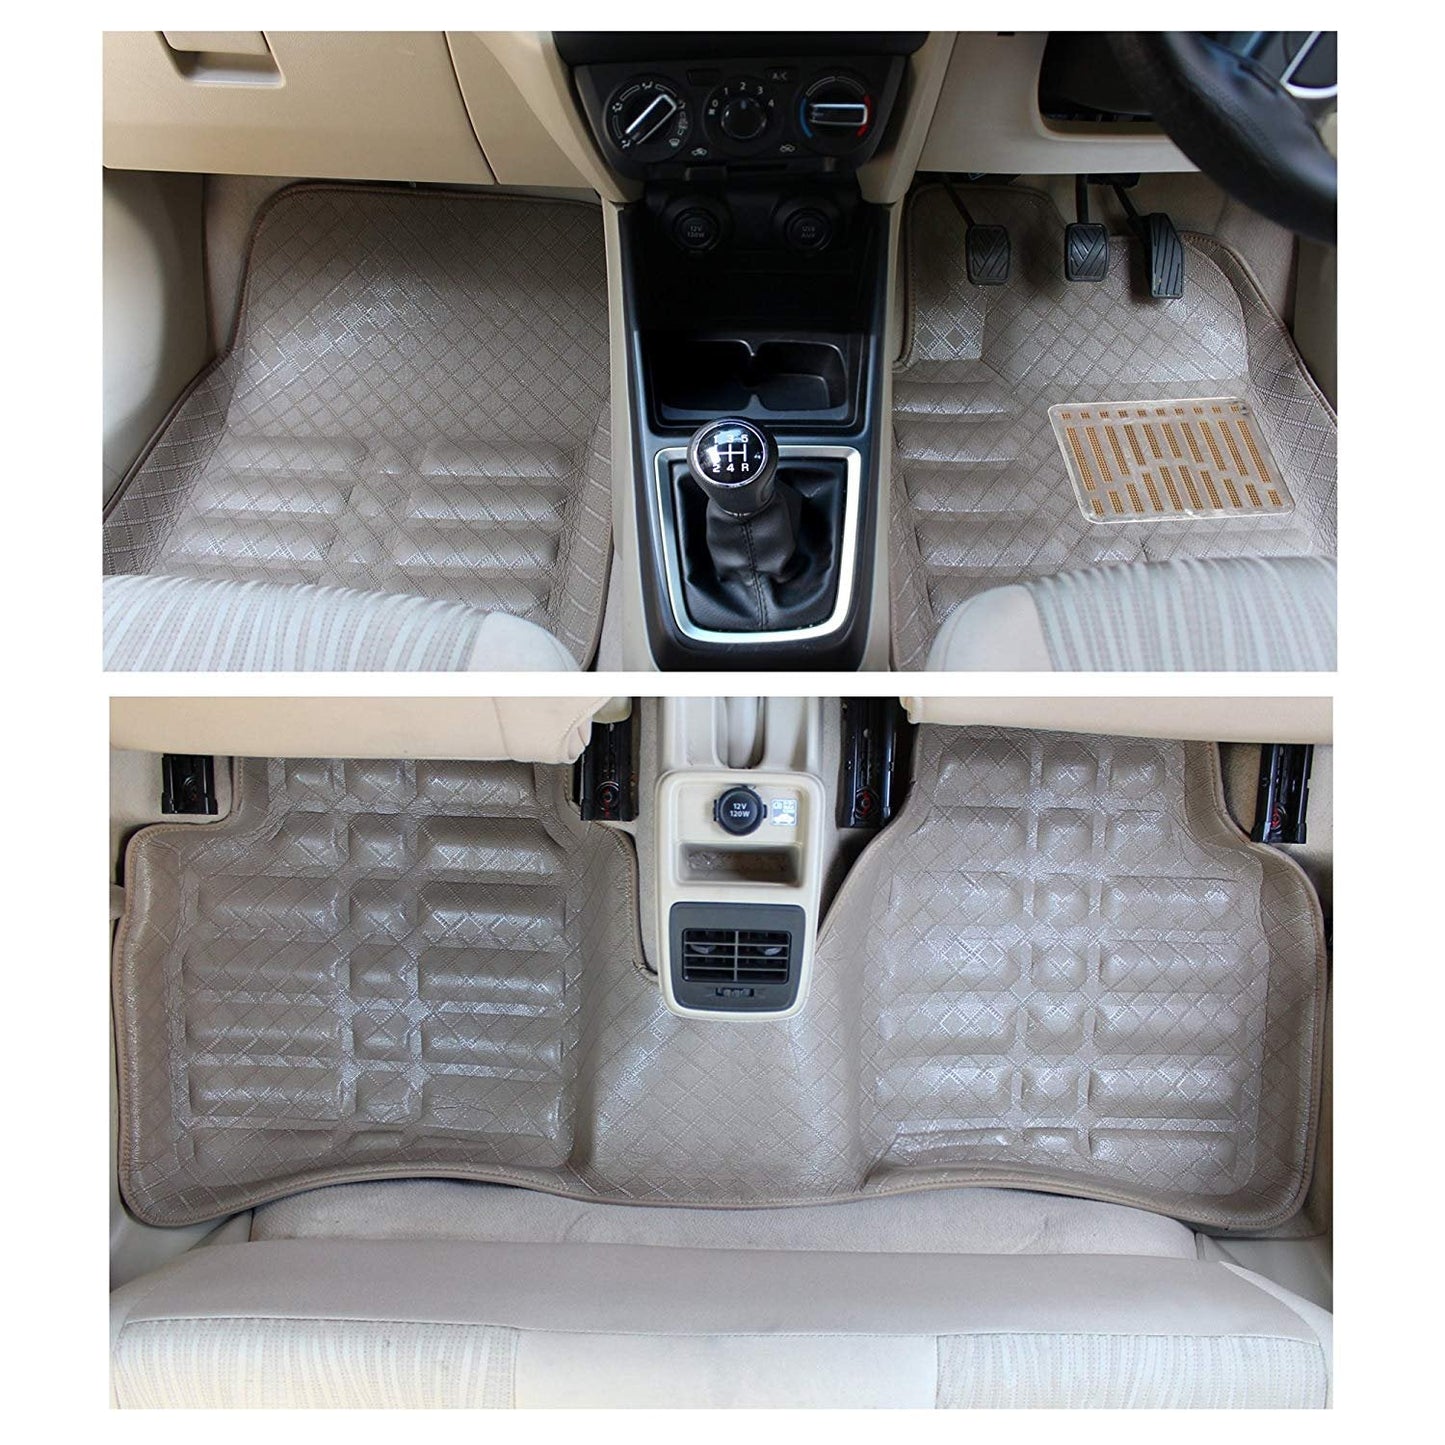 Oshotto 4D Artificial Leather Car Floor Mats For Maruti Suzuki Old WagonR - Set of 3 (2 pcs Front & one Long Single Rear pc) - Beige